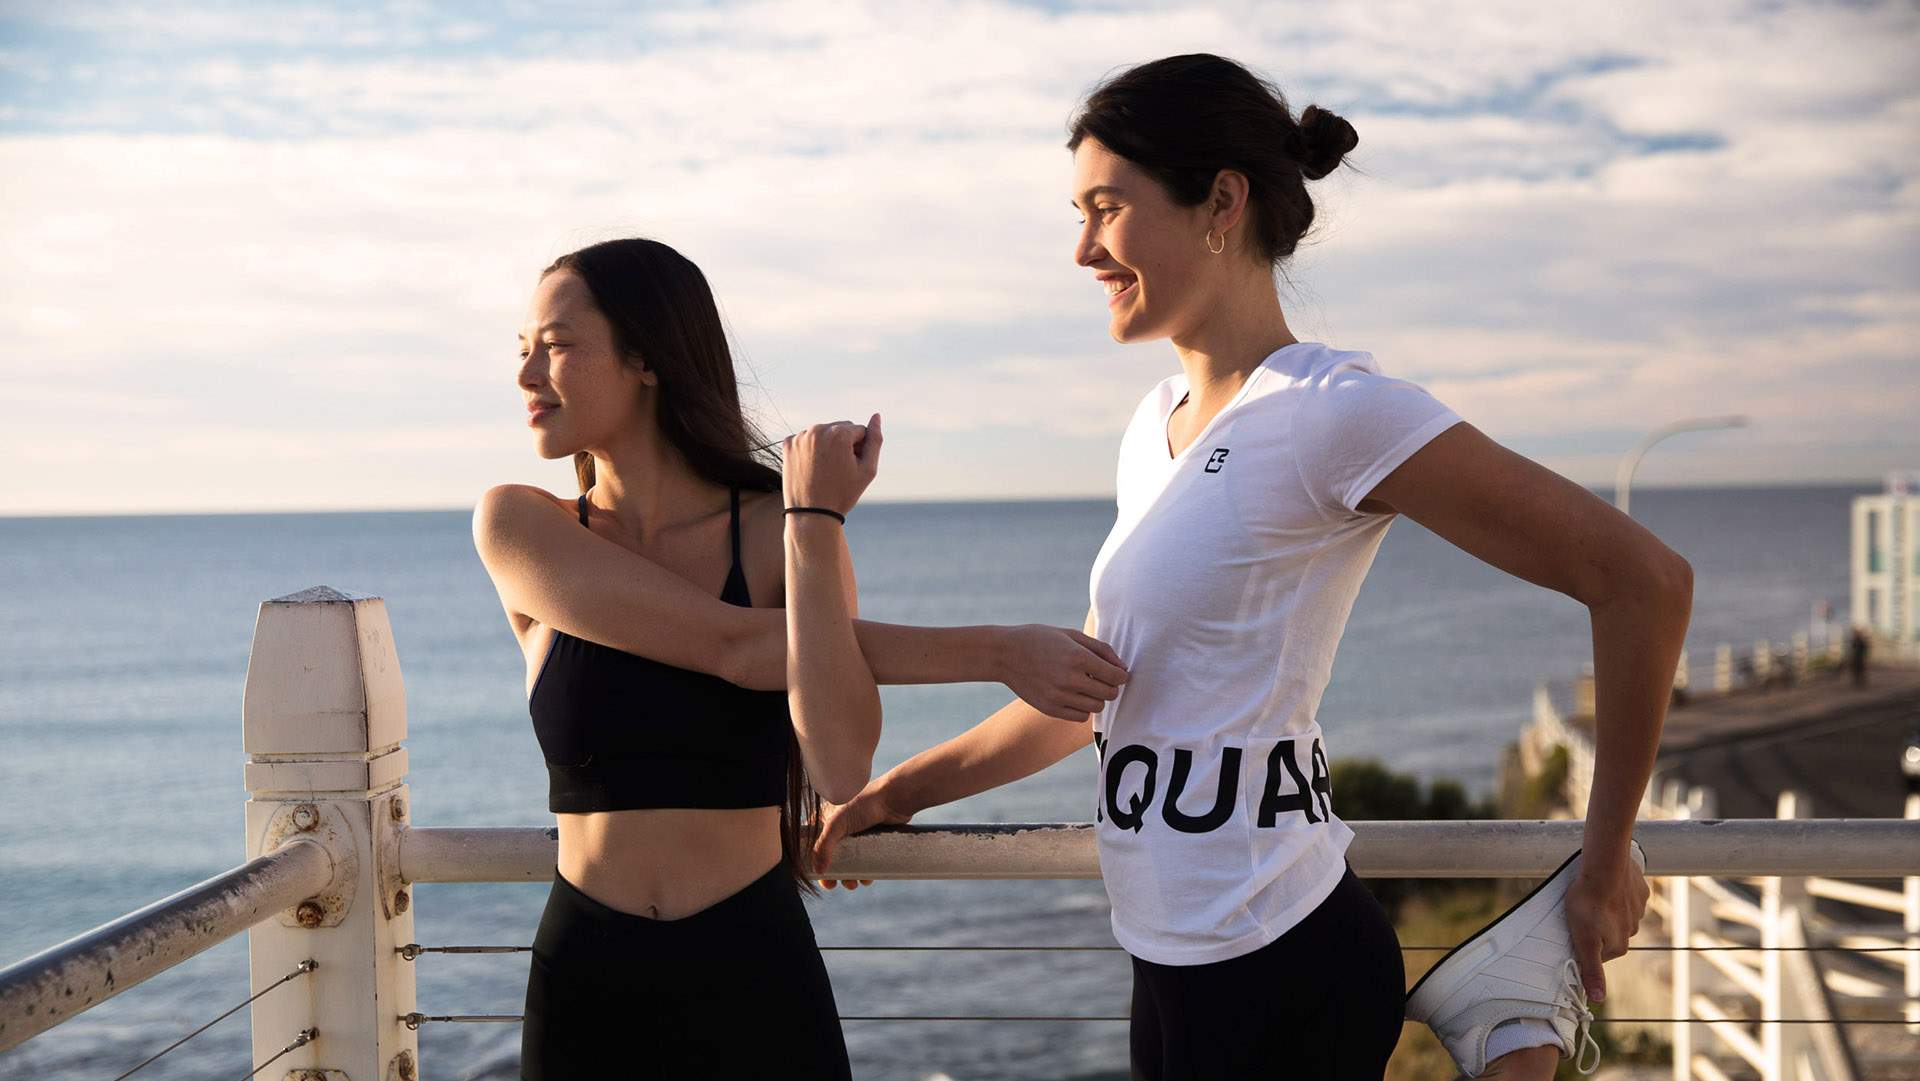 New Fitness App Esquared Gives You On-Demand, No-Strings-Attached Gym Access